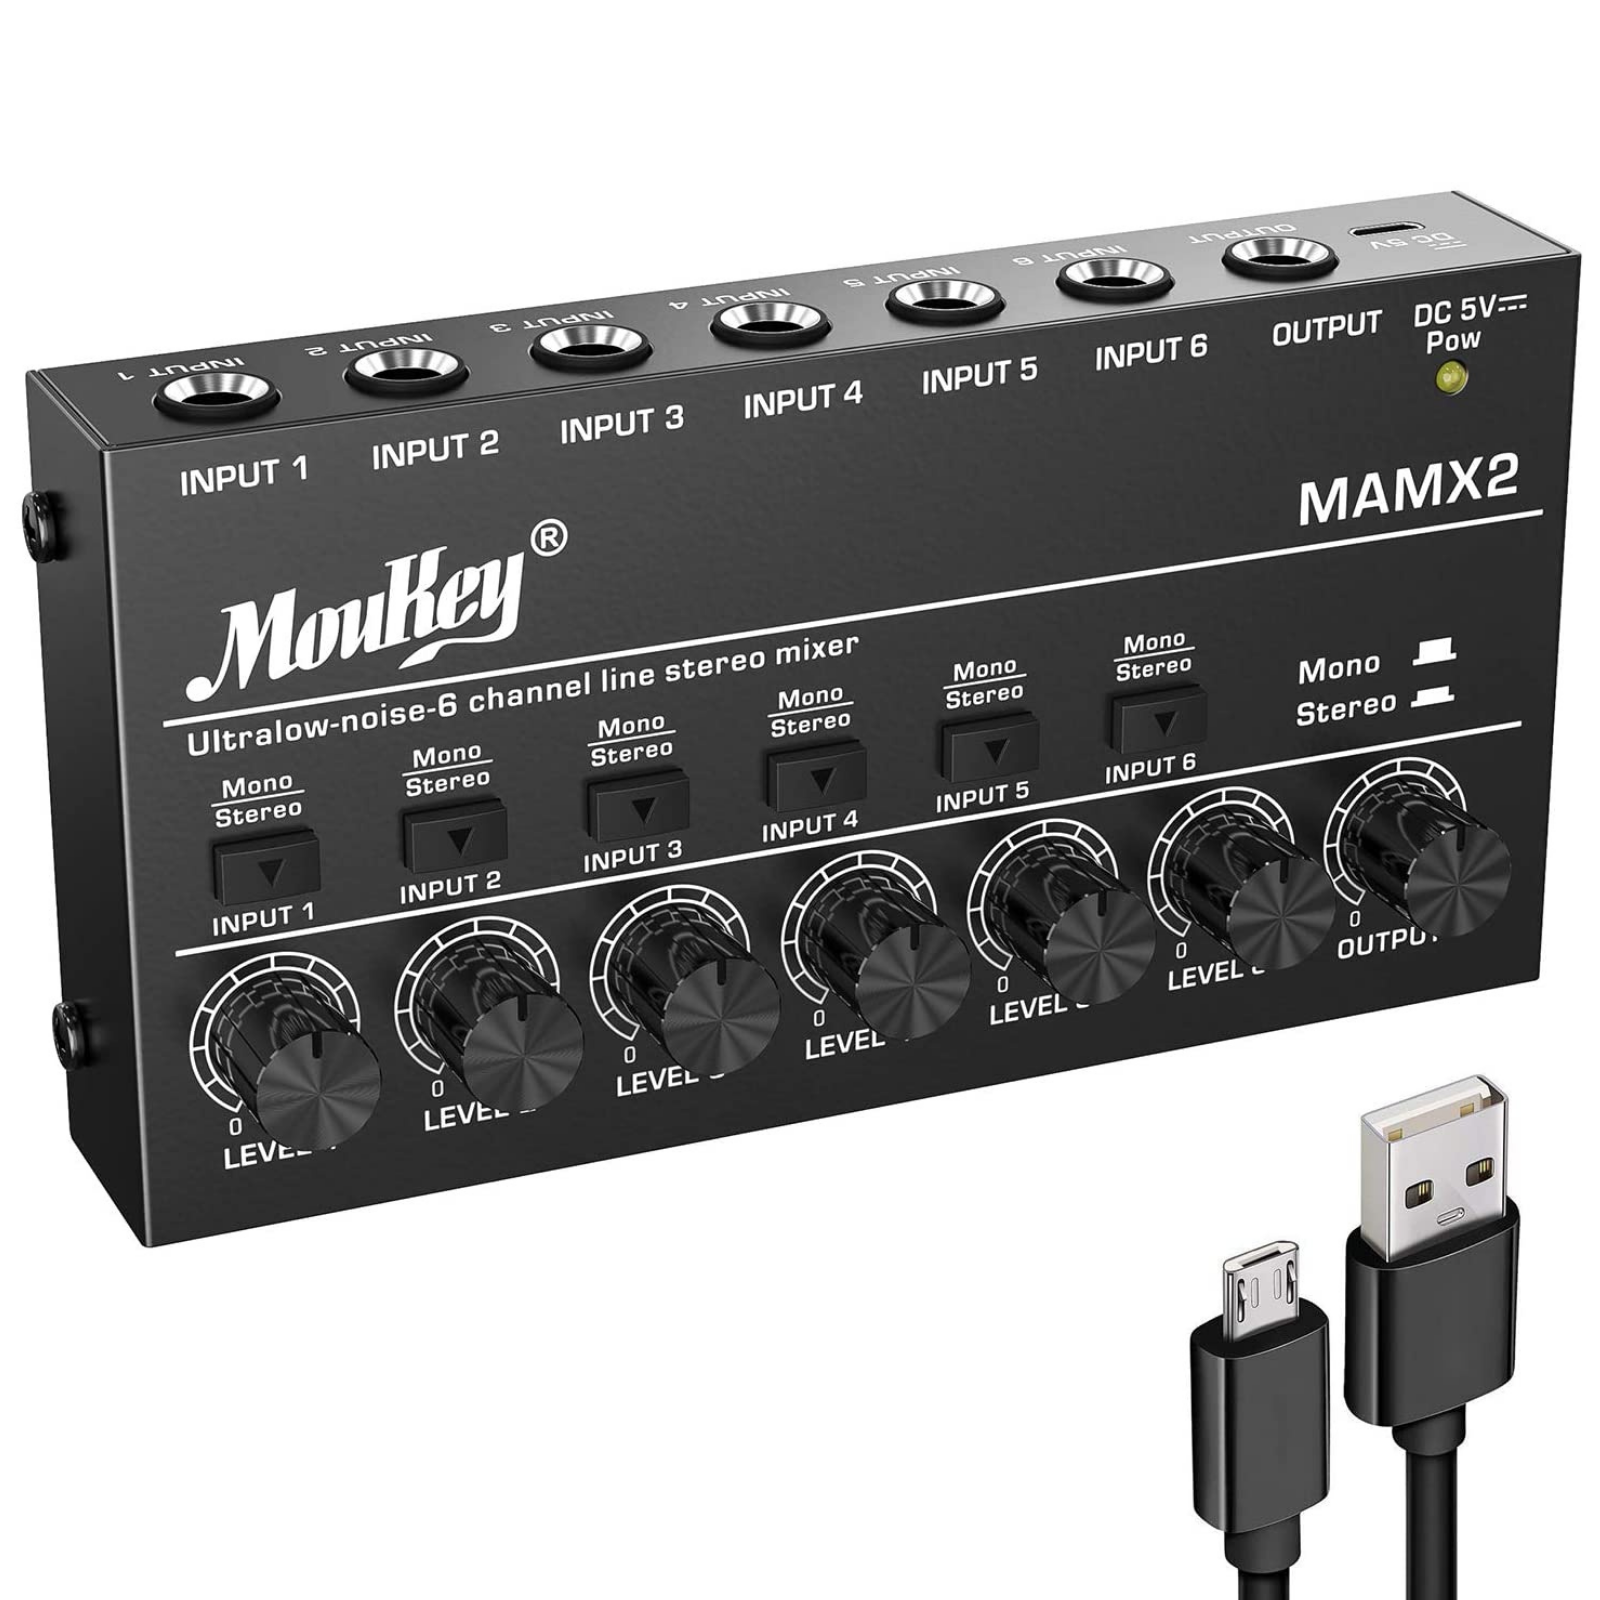 

Moukey 6-stereo Mini Audio Mixer, Ultra-low-noise 6-channel Line Mixer for Submixing, DC 5V Mixer with USB Cable